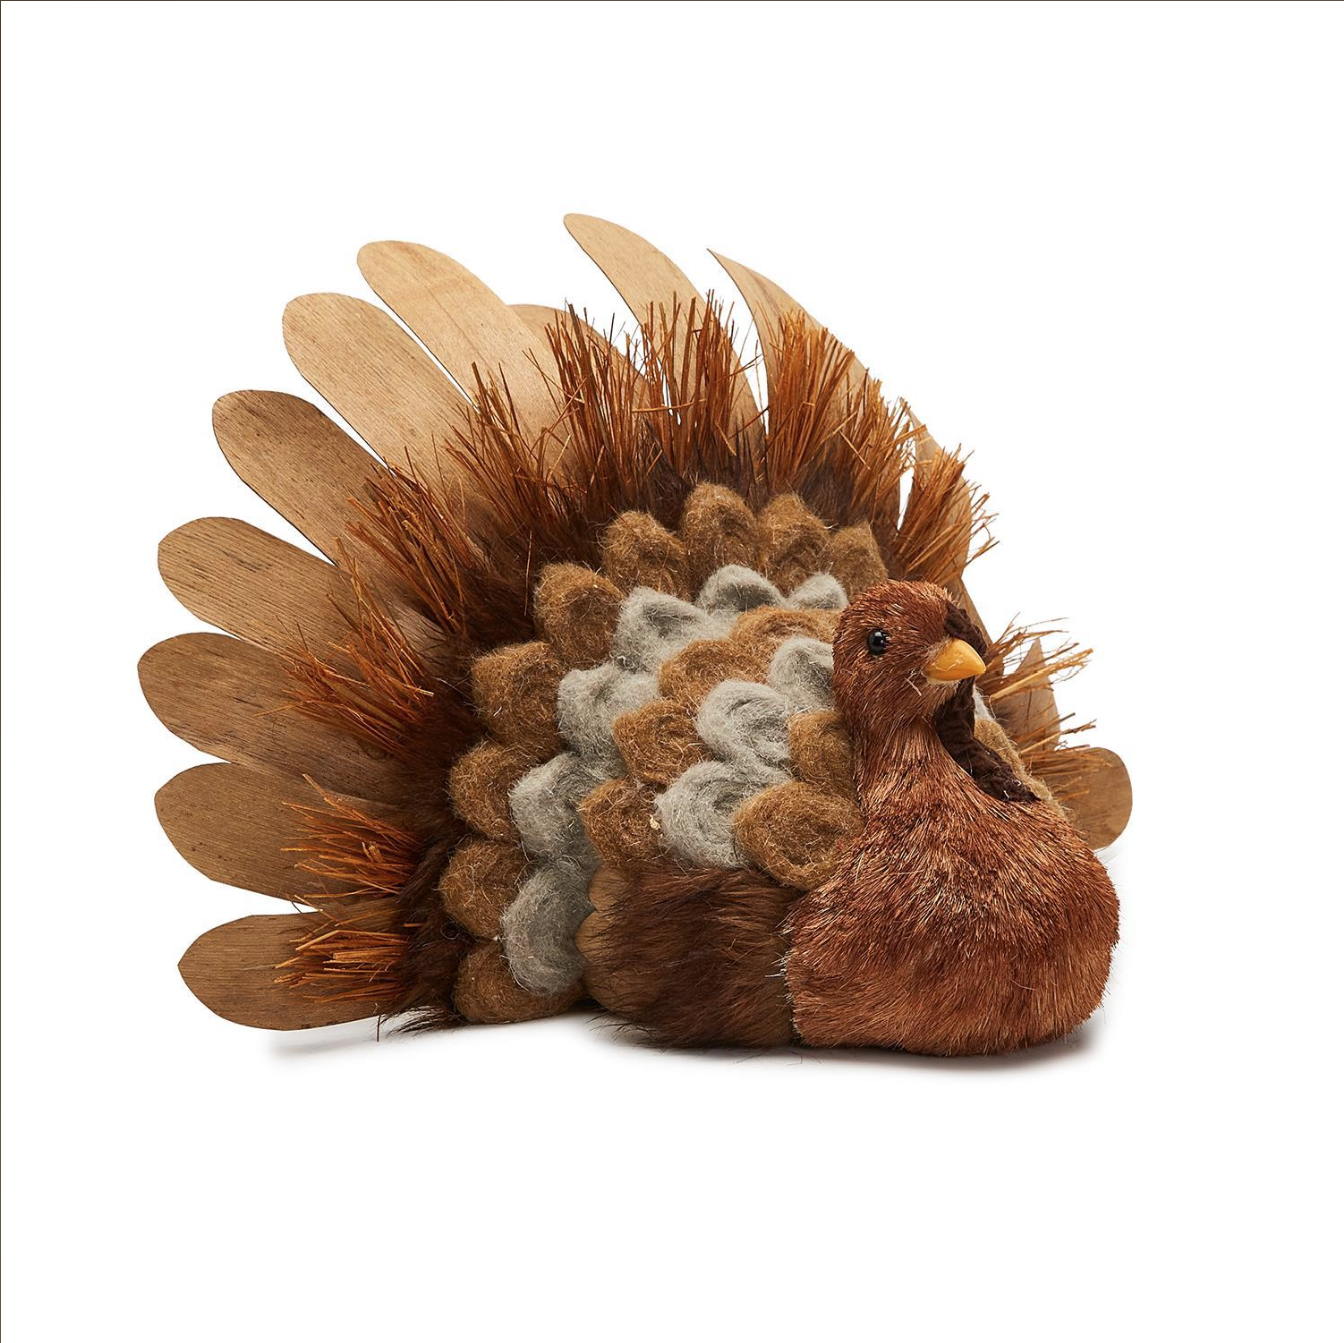 Give Thanks Hand-Crafted Turkey Decor